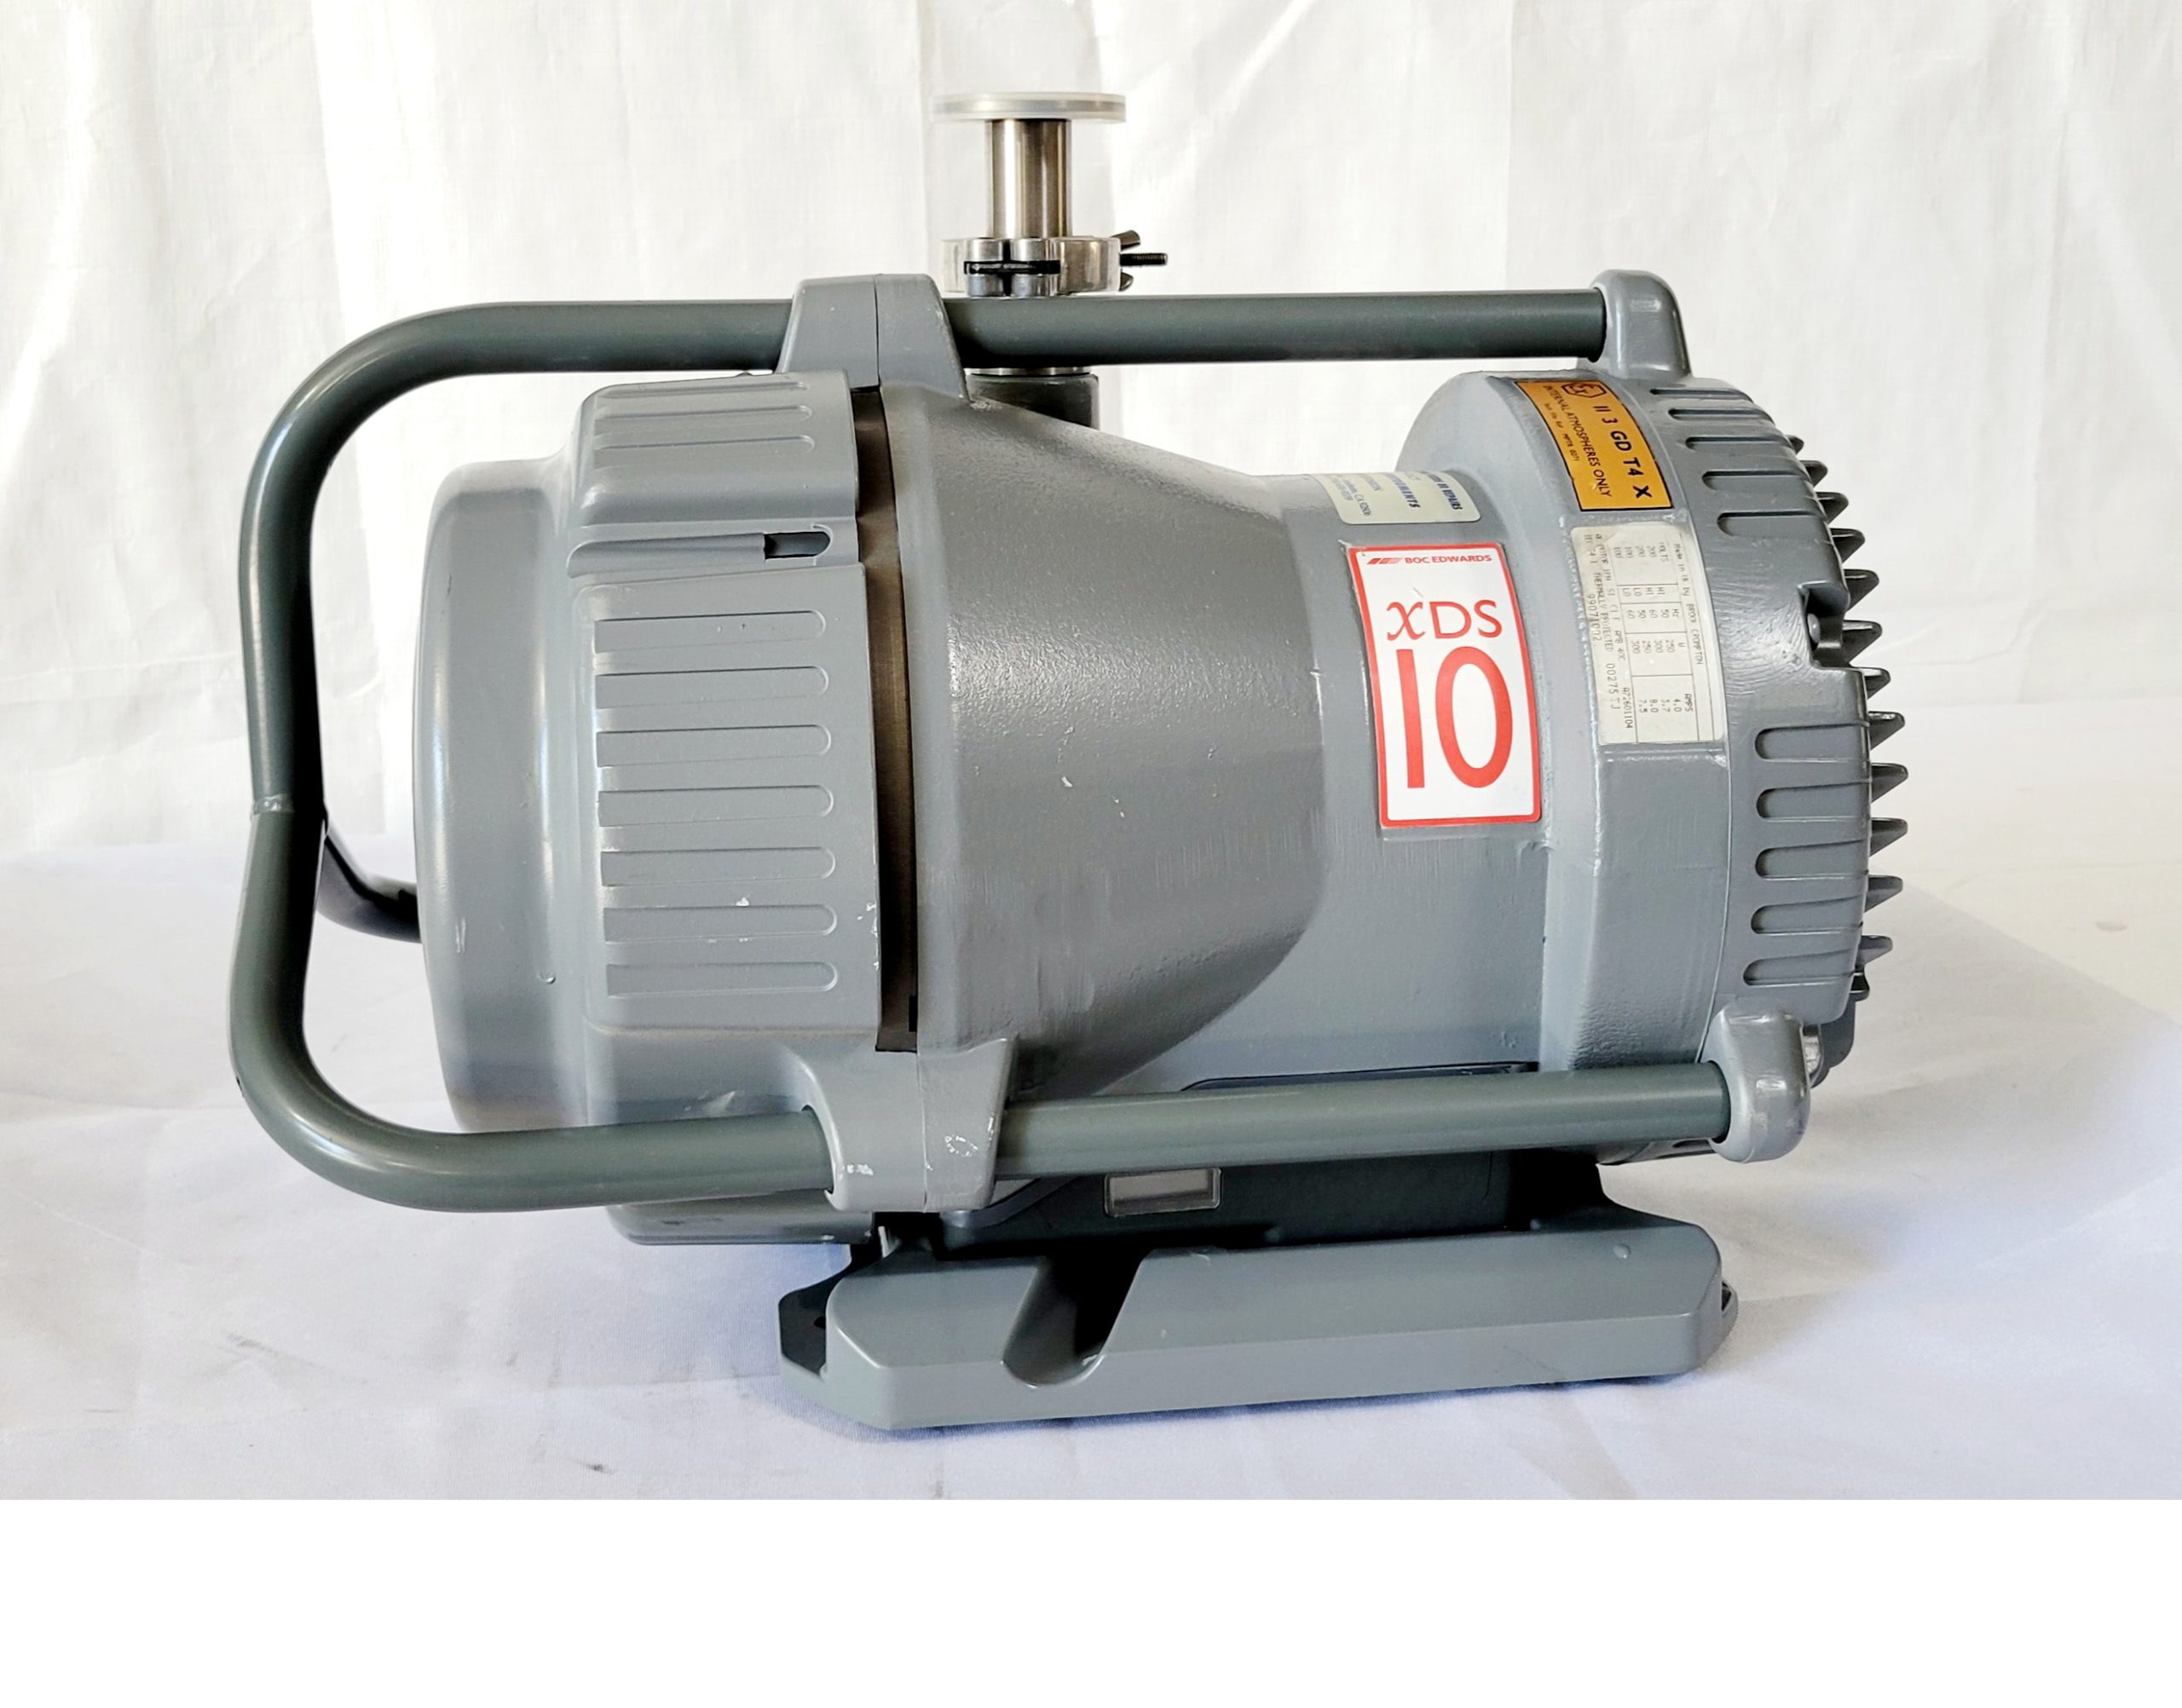 Edwards XDS 10 Dry Scroll Vacuum Pump -67016 For Sale